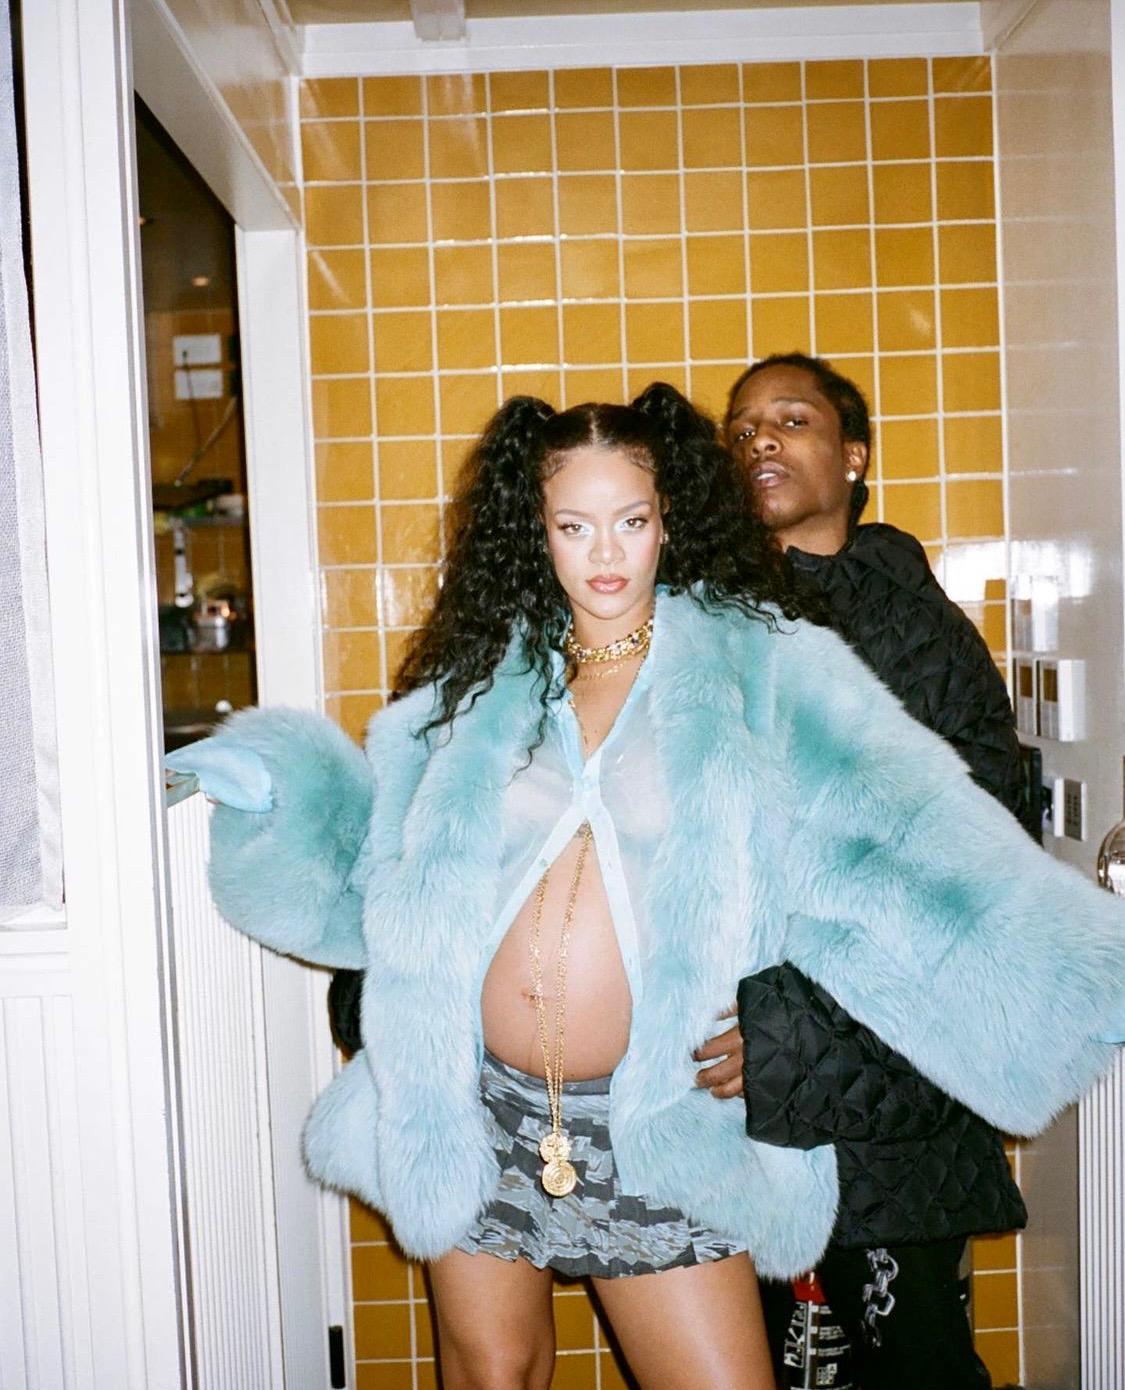 Presenting one of Tom Ford's most lusted-after designs during his tenure at the house of Gucci. Recently seen on Rihanna during her birthday celebrations in London! This oversized light baby blue fox fur chubby coat debuted as the grand finale of